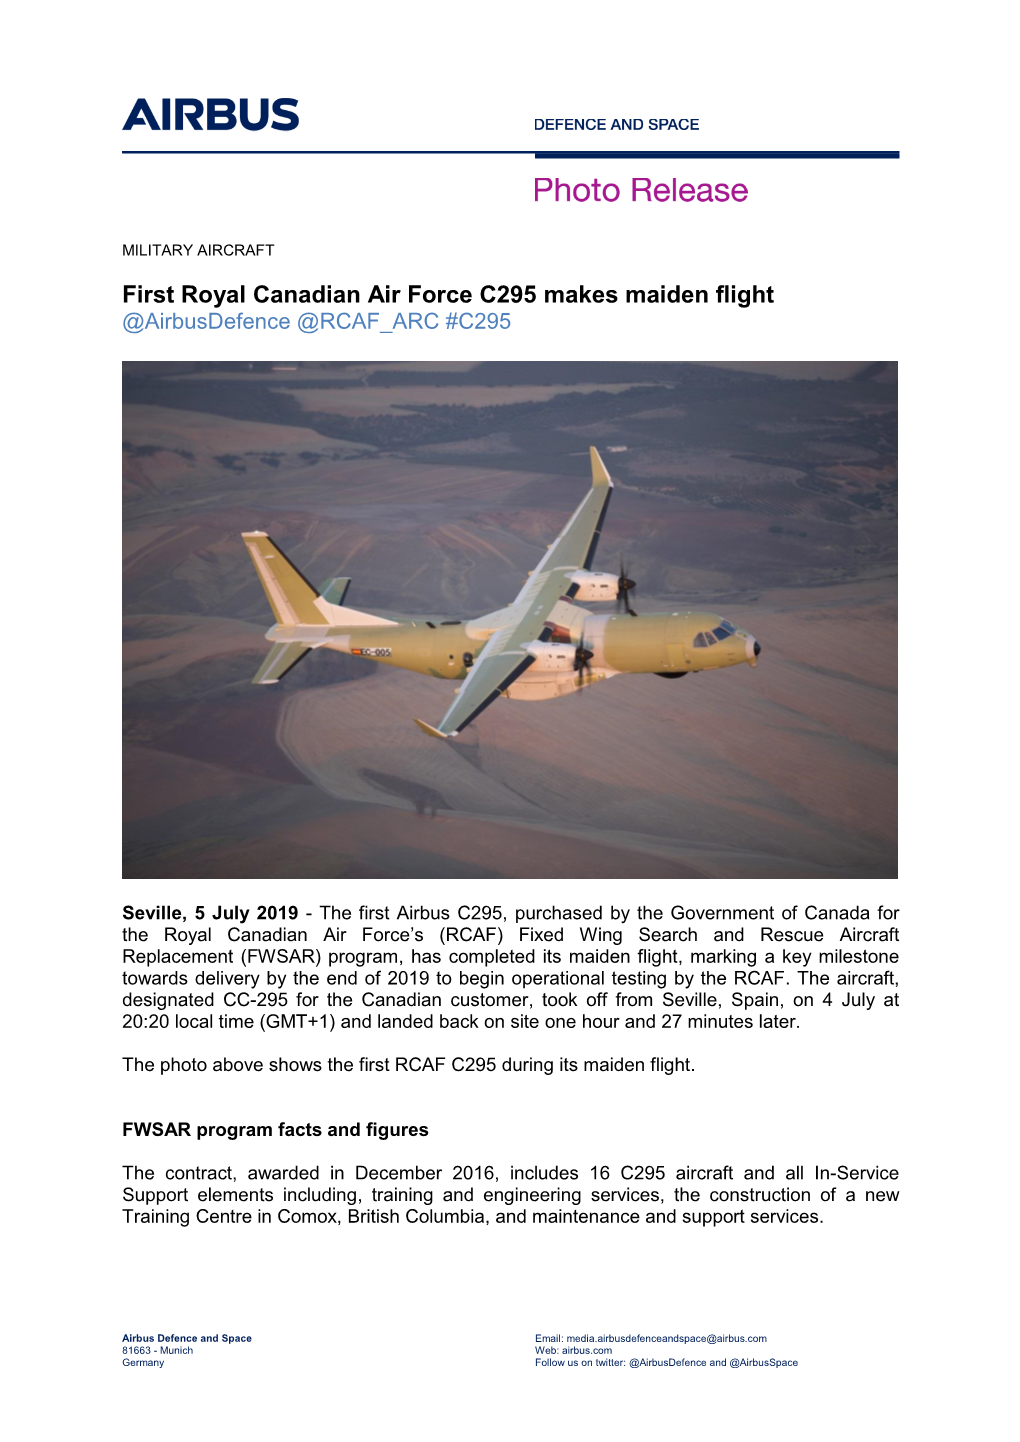 First Royal Canadian Air Force C295 Makes Maiden Flight @Airbusdefence @RCAF ARC #C295